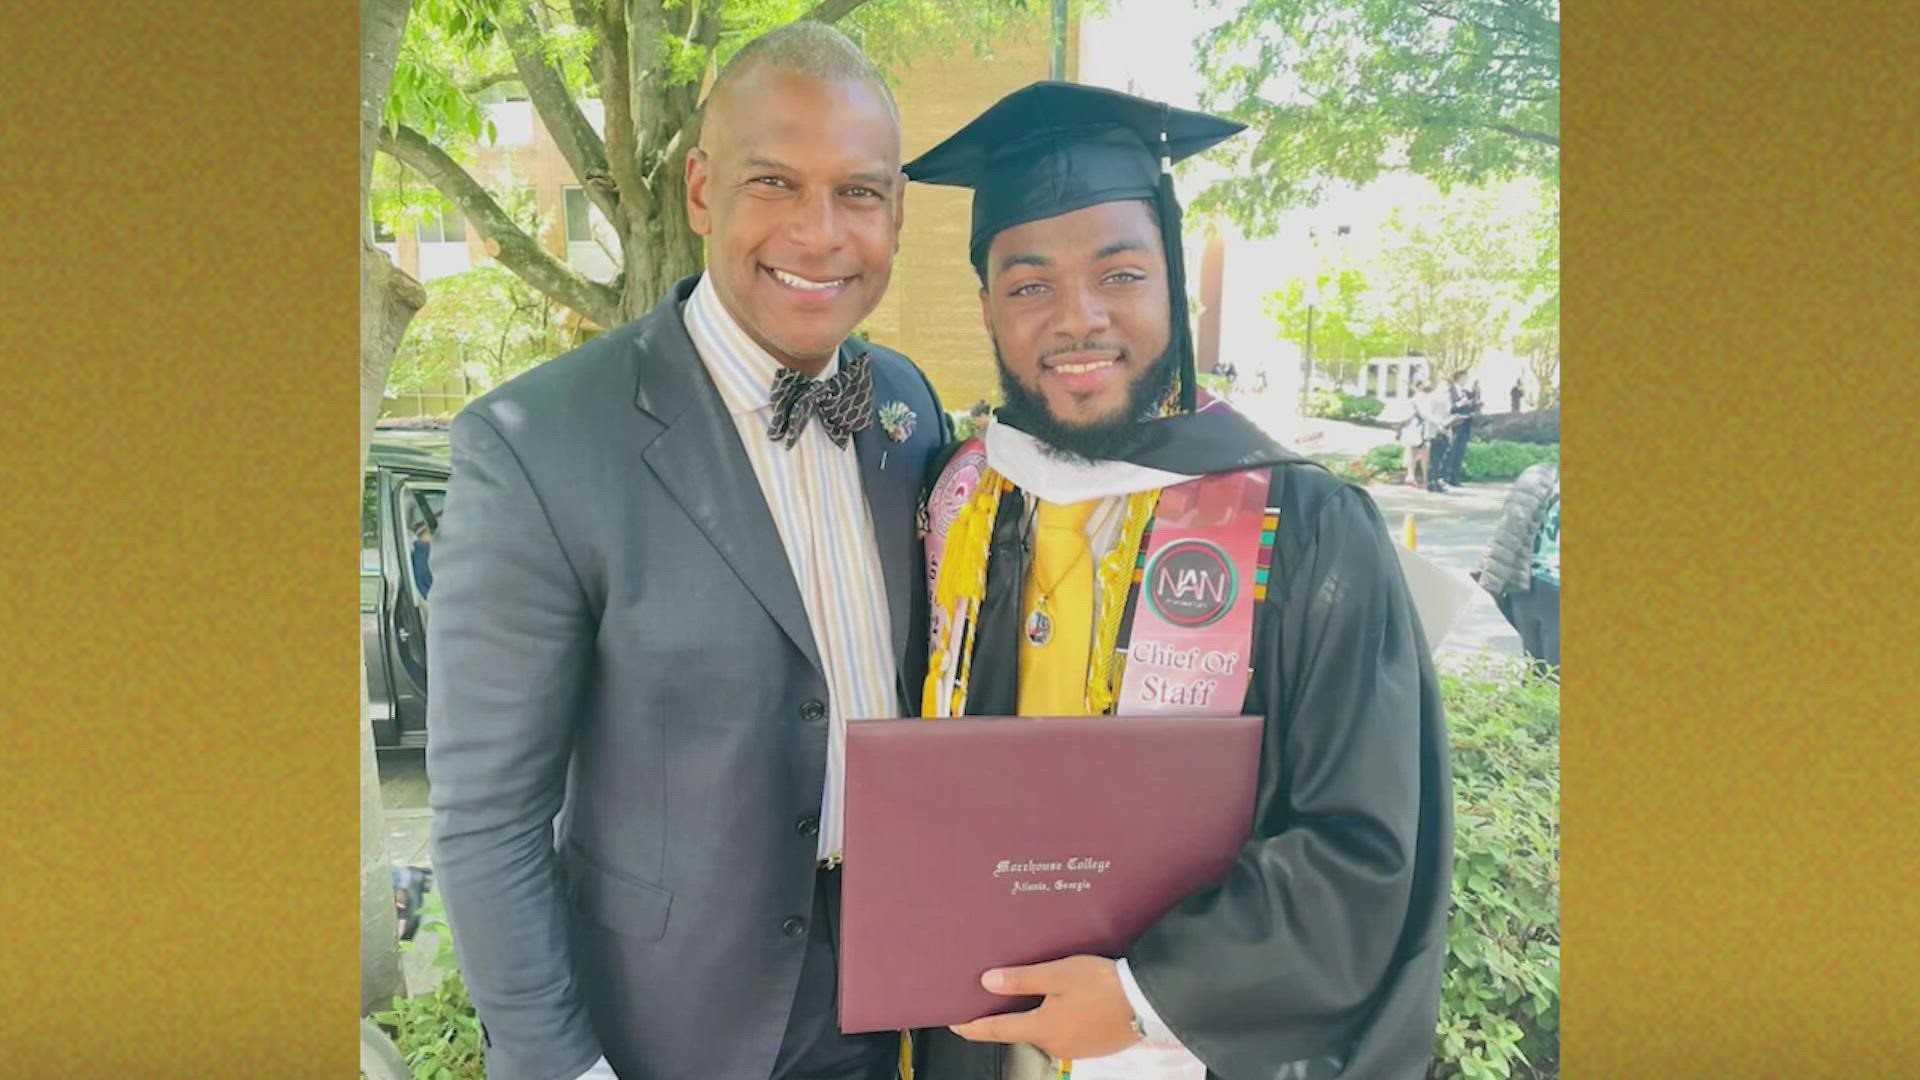 This Klein Forest grad went from student to teacher thanks to his ambition, his mother's support and Houstonian donations.